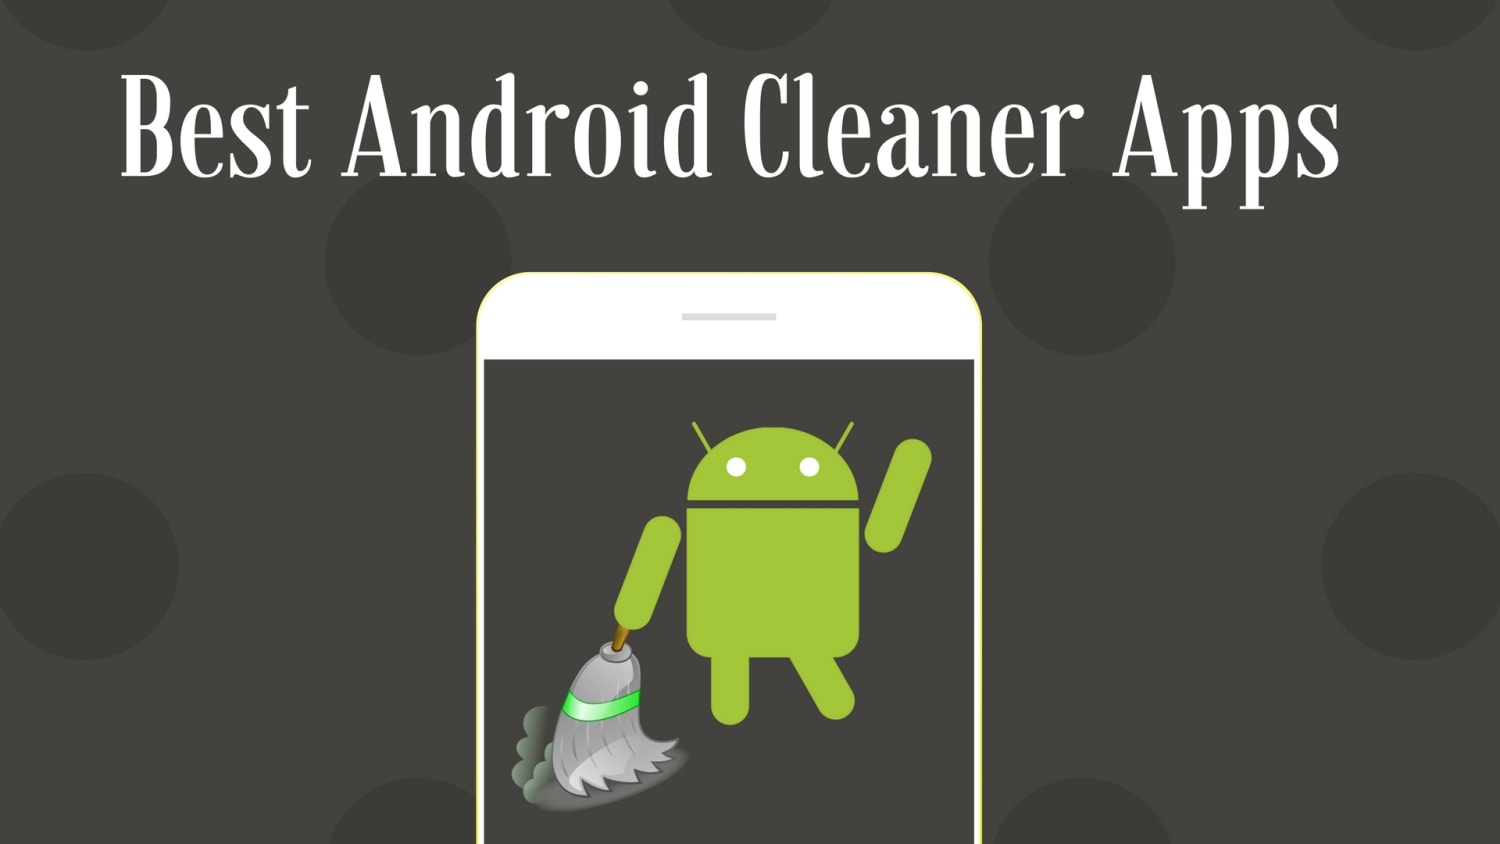 Nox Cleaner - Clean Your Android Phone with the Best 2020 Cleaner App